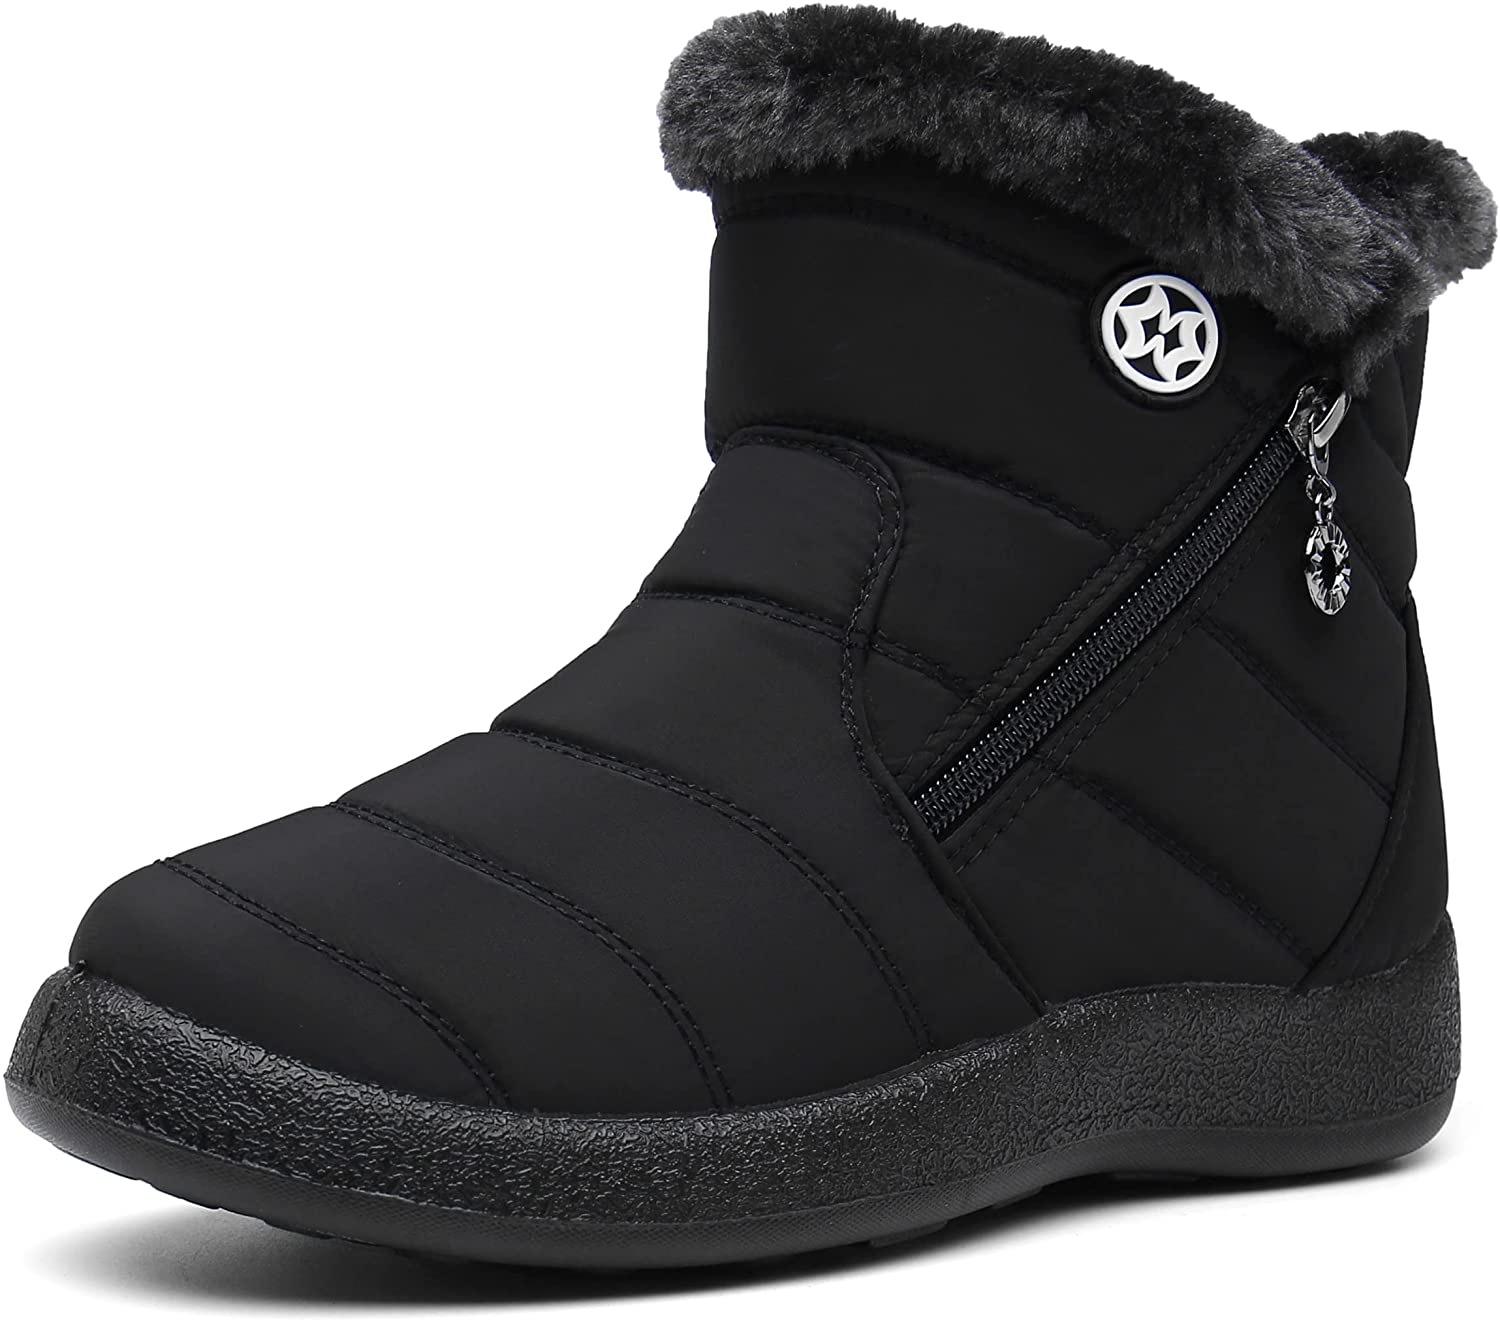 Eagsouni Anti-Skid Fur-Lined Boots For Women